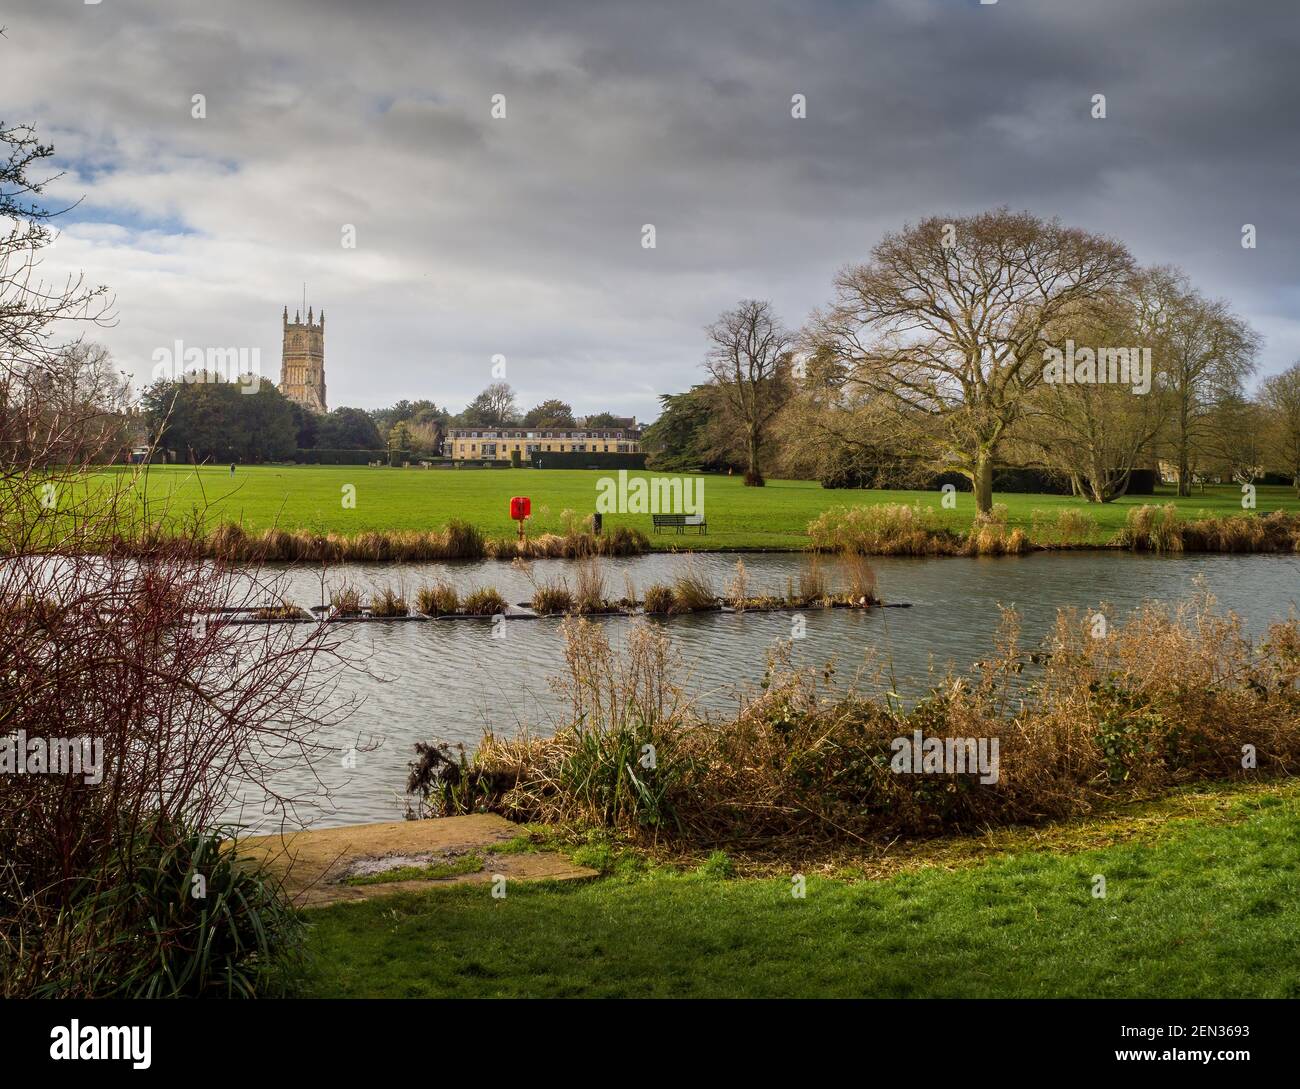 Walking around the River Churn in Cirencester, England Stock Photo